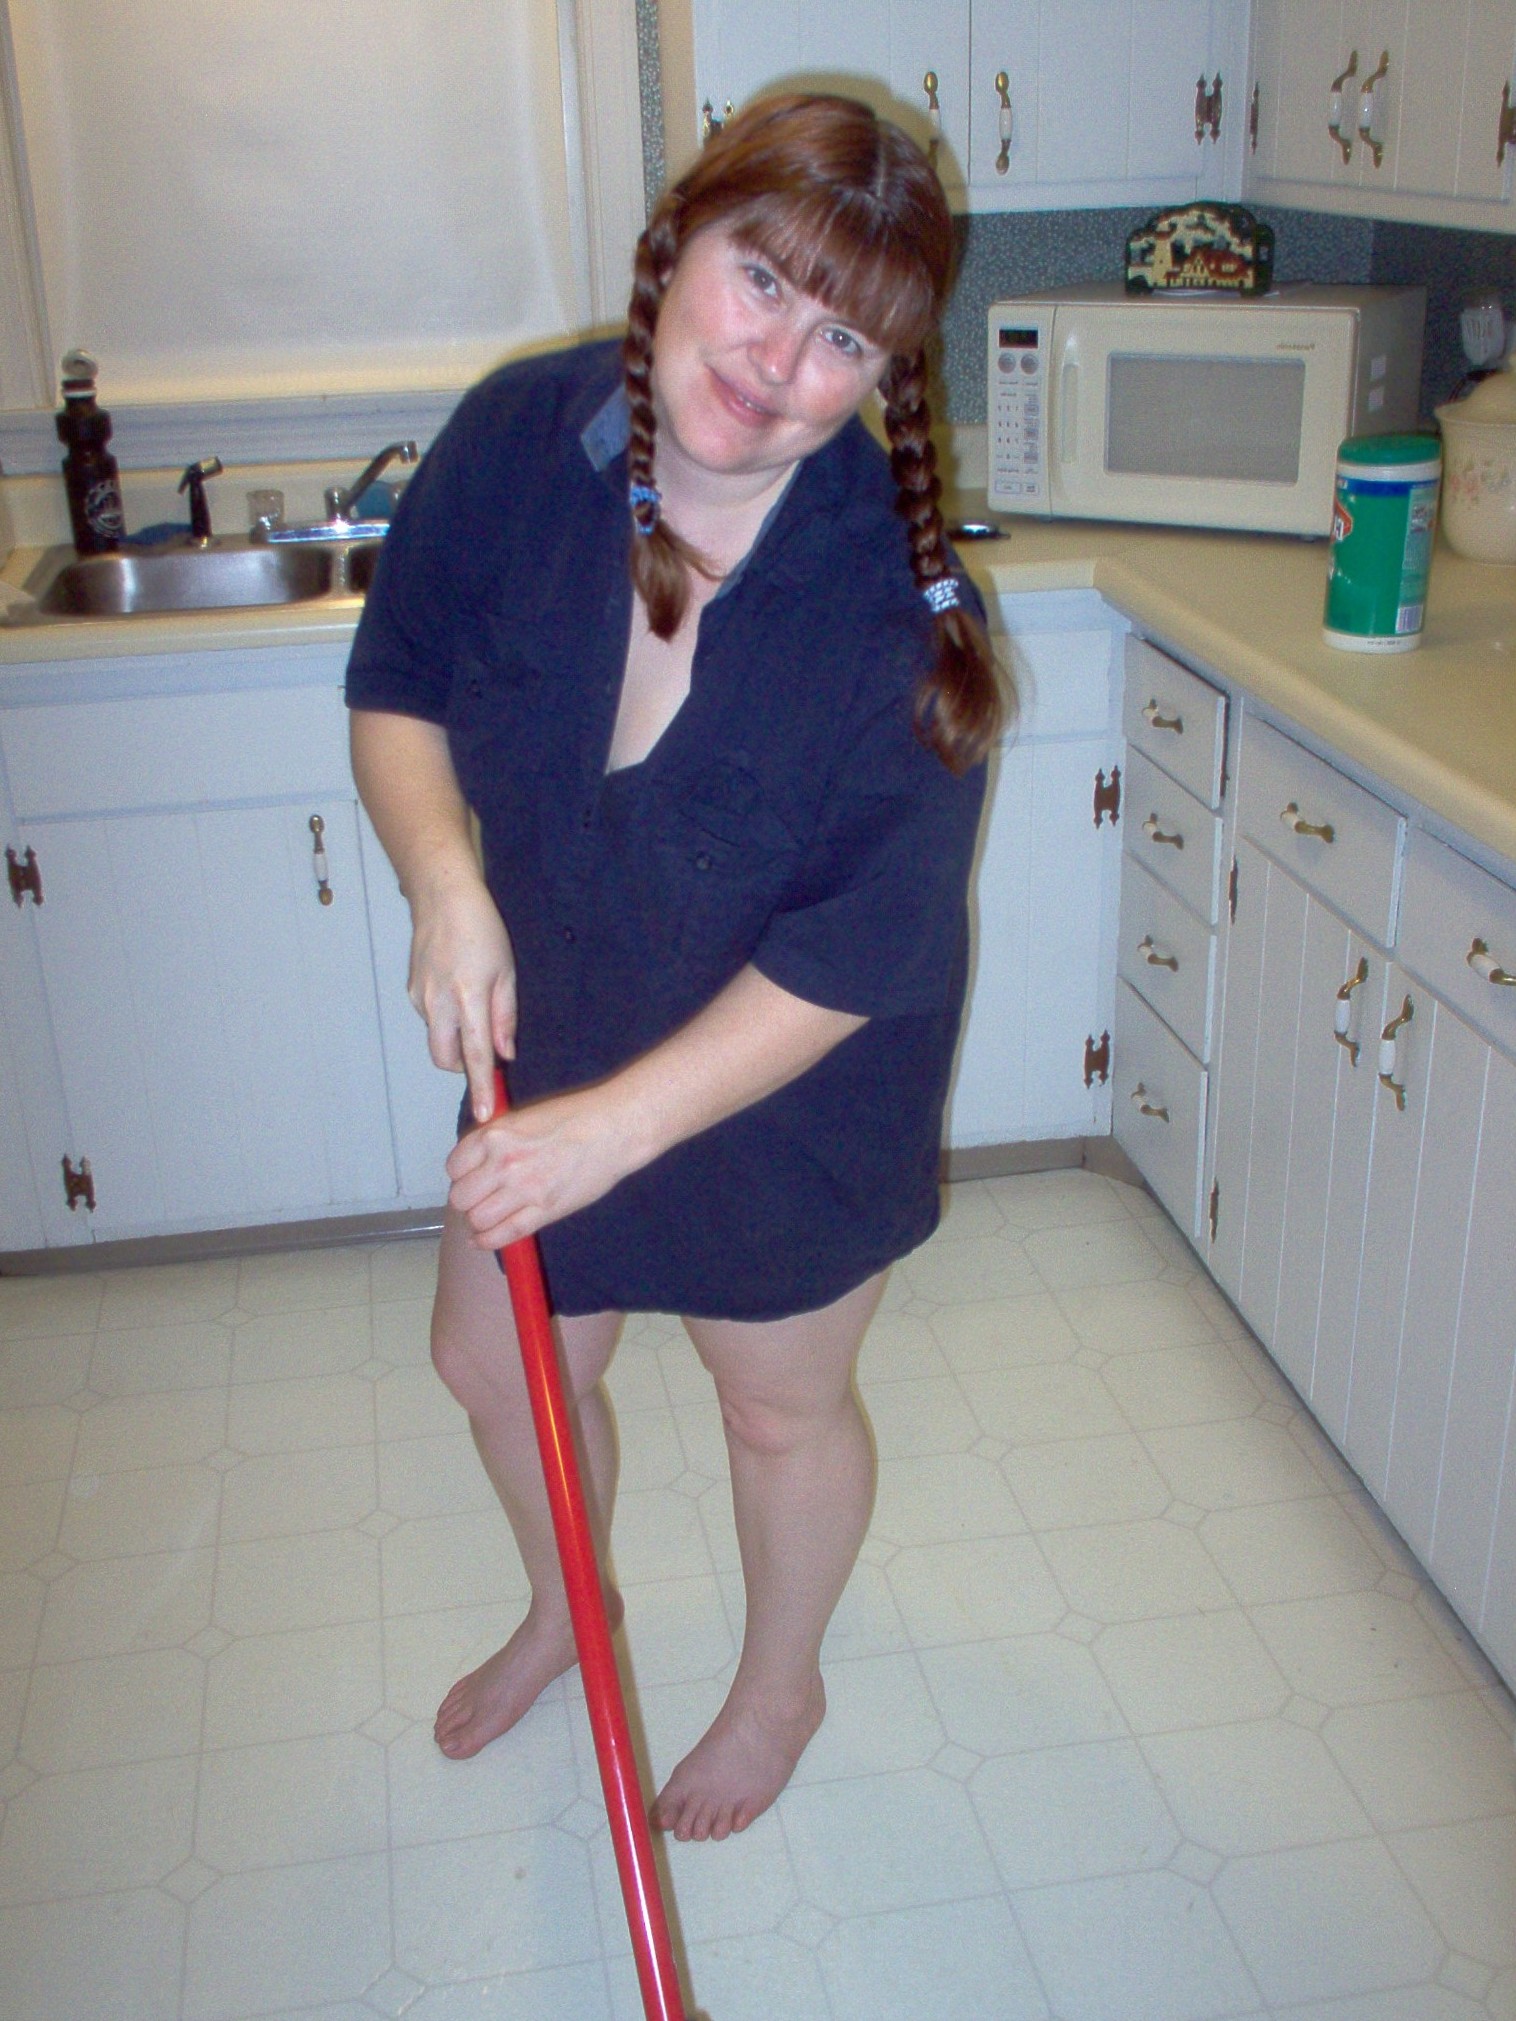 Kelly does housework